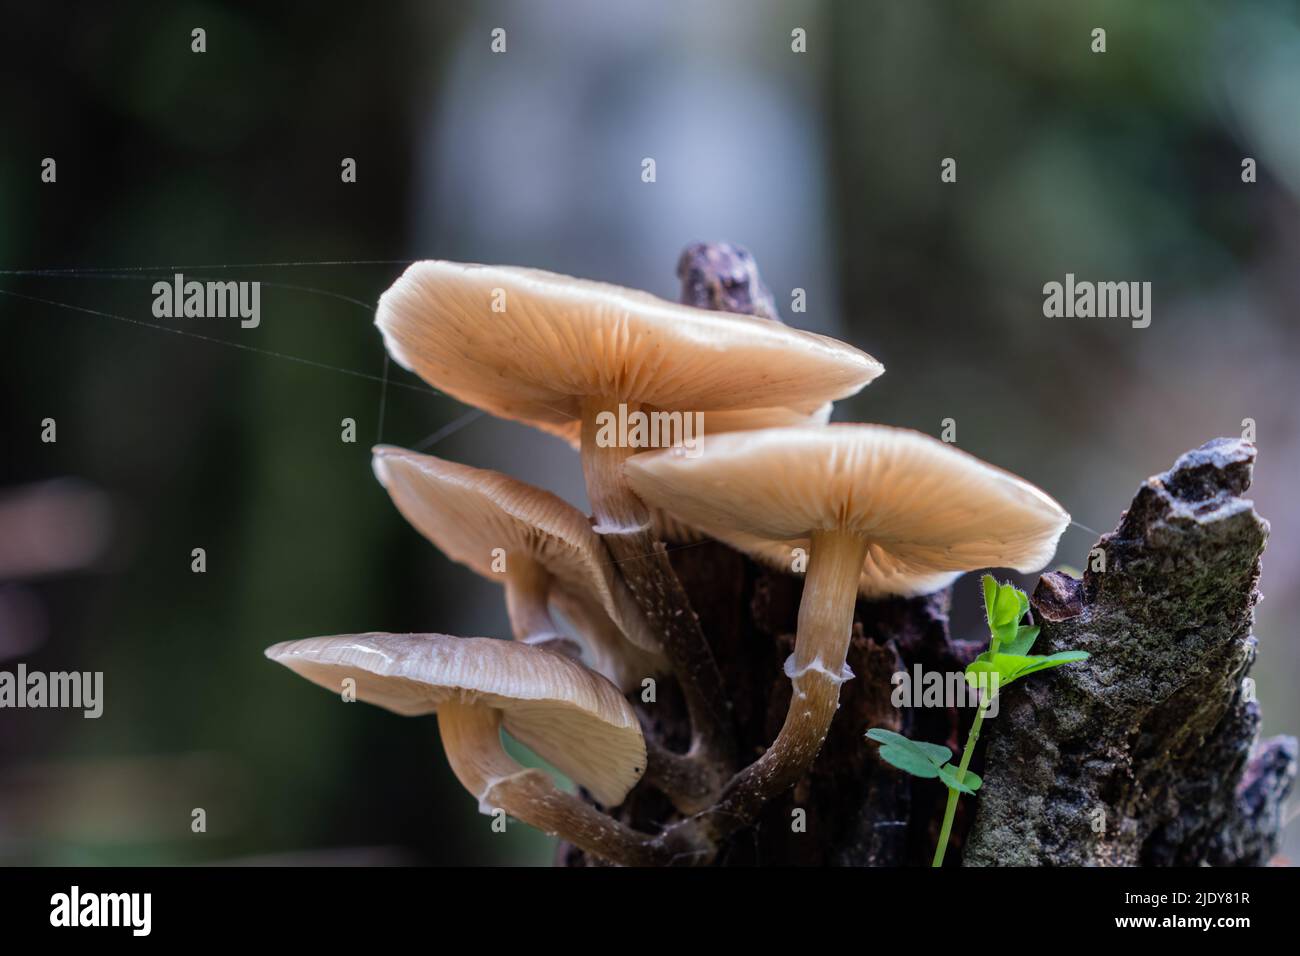 Creamy white fungi growing from old tree stump on rainforest floor in Westland forest floor. Stock Photo